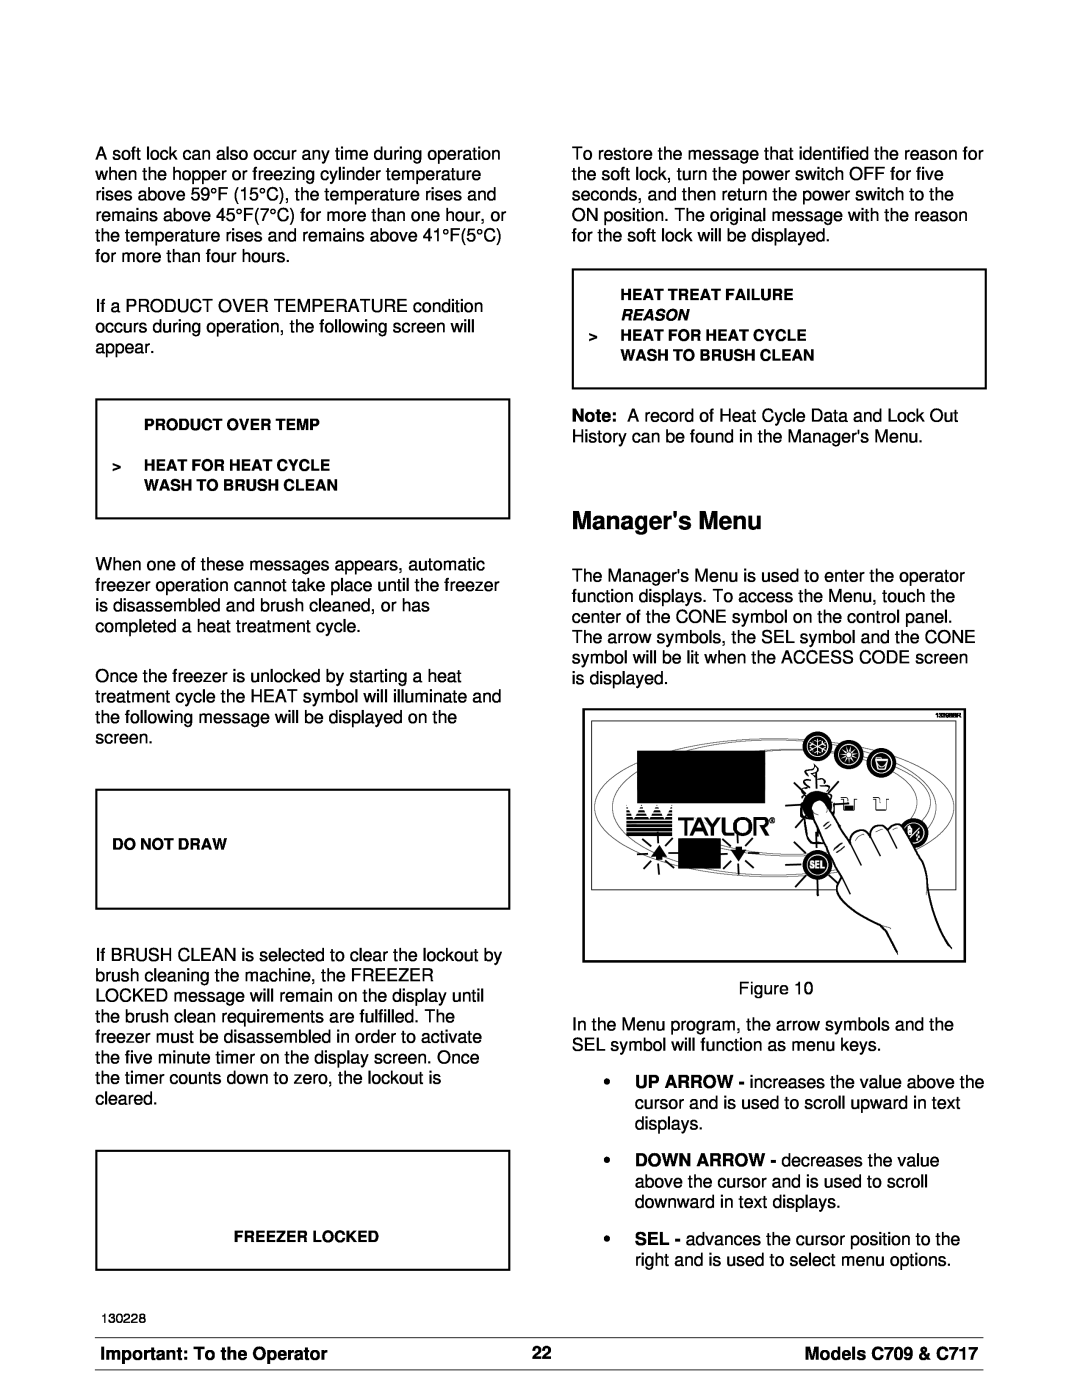 Taylor manual Managers Menu, Important To the Operator, Models C709 & C717 